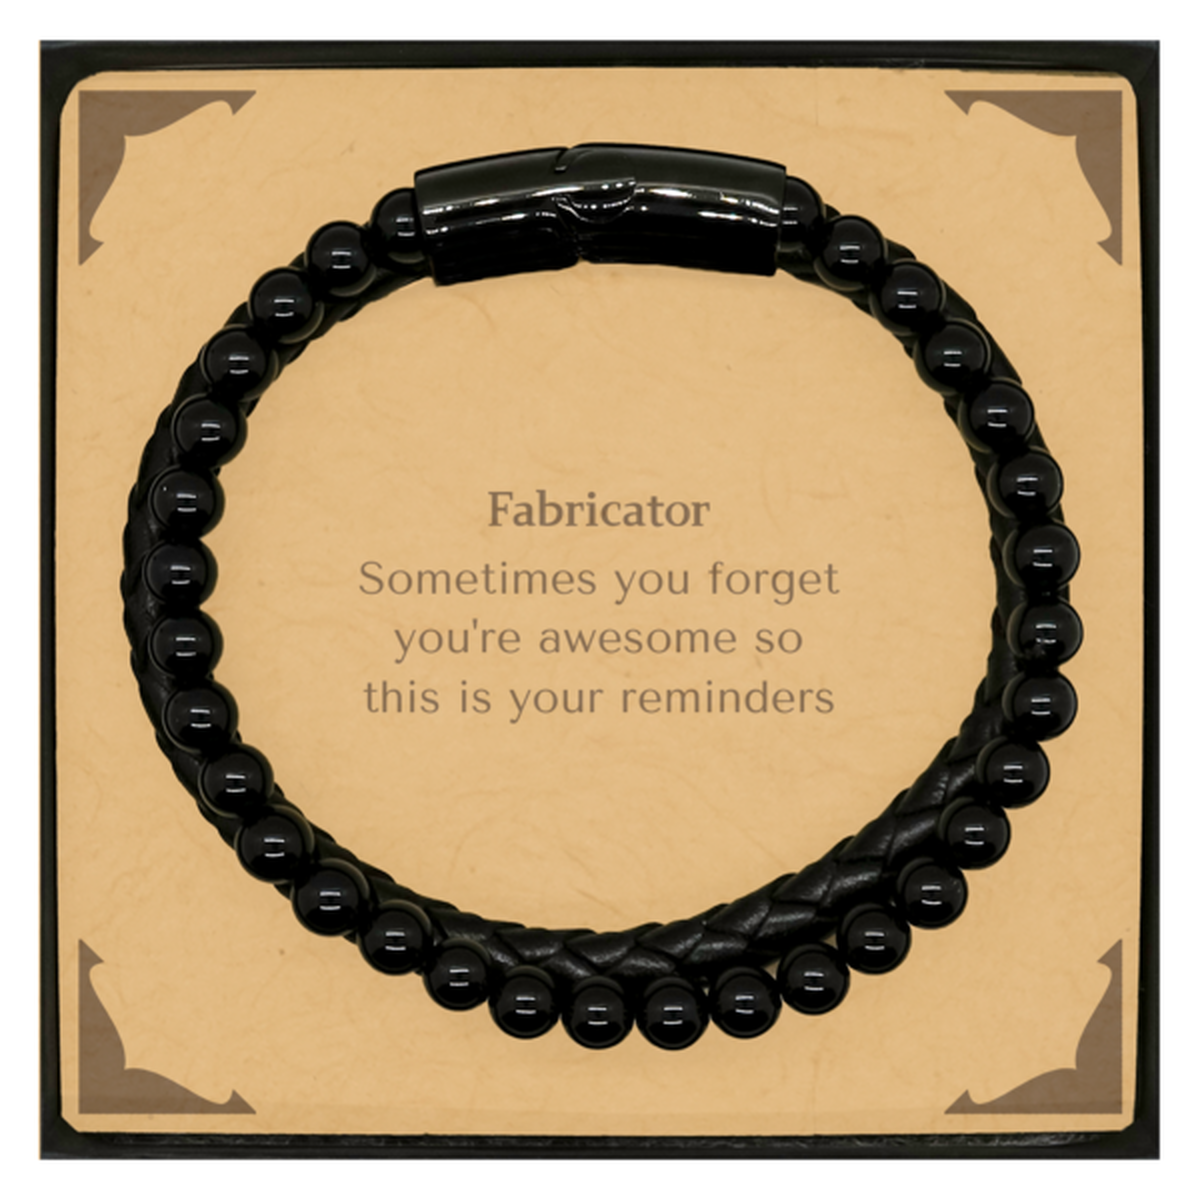 Sentimental Fabricator Stone Leather Bracelets, Fabricator Sometimes you forget you're awesome so this is your reminders, Graduation Christmas Birthday Gifts for Fabricator, Men, Women, Coworkers